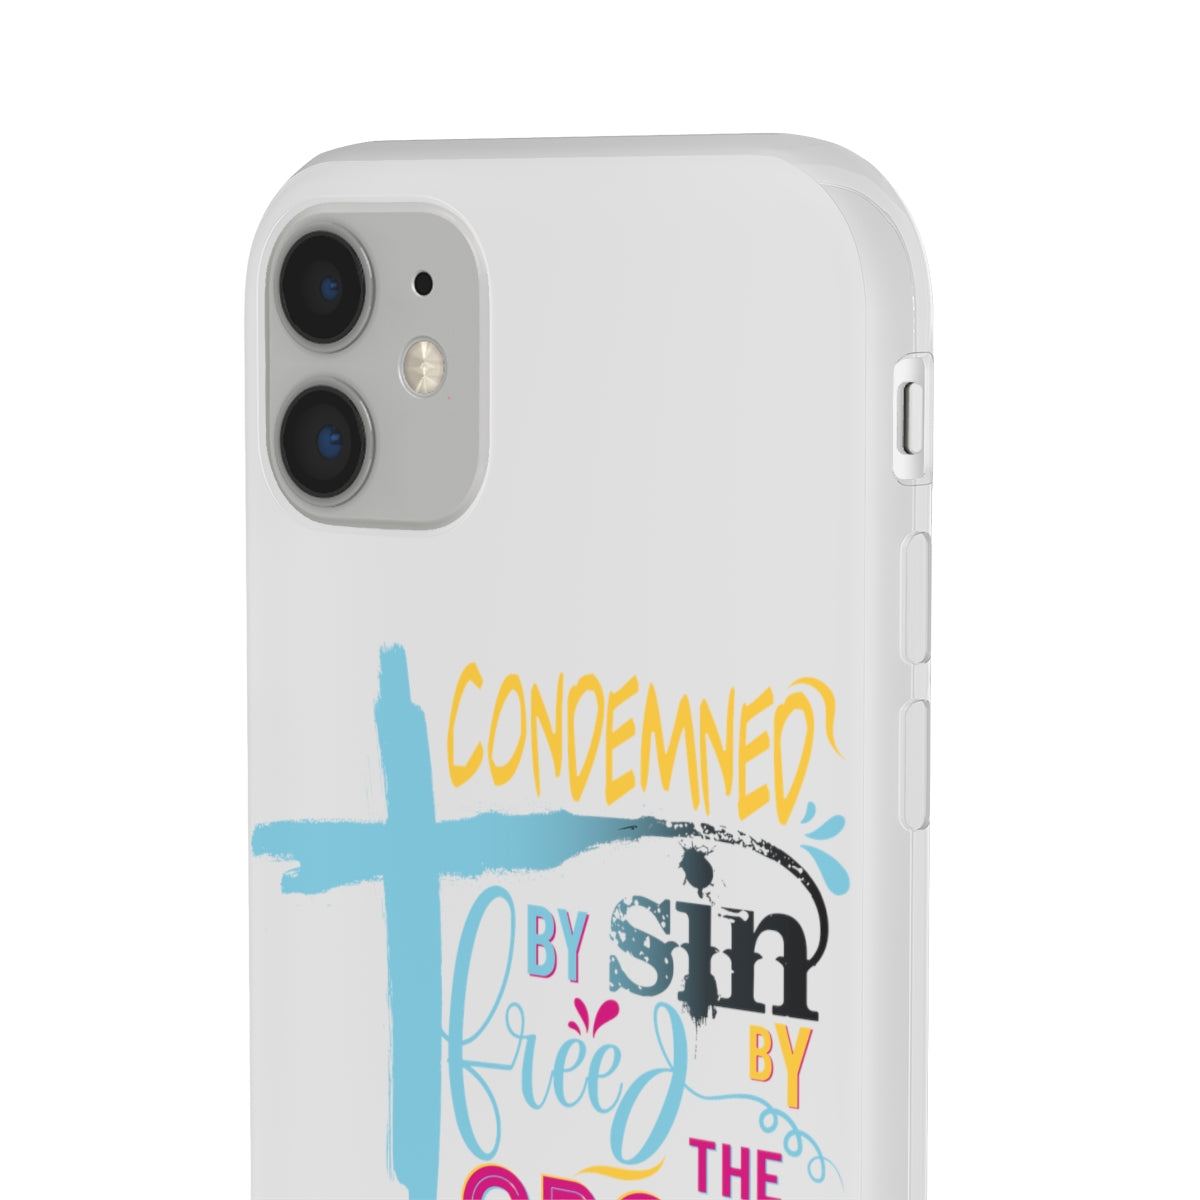 Condemned by Sin Freed By The Cross Flexi Phone Case compatible with select IPhone & Samsung Galaxy Phones Printify